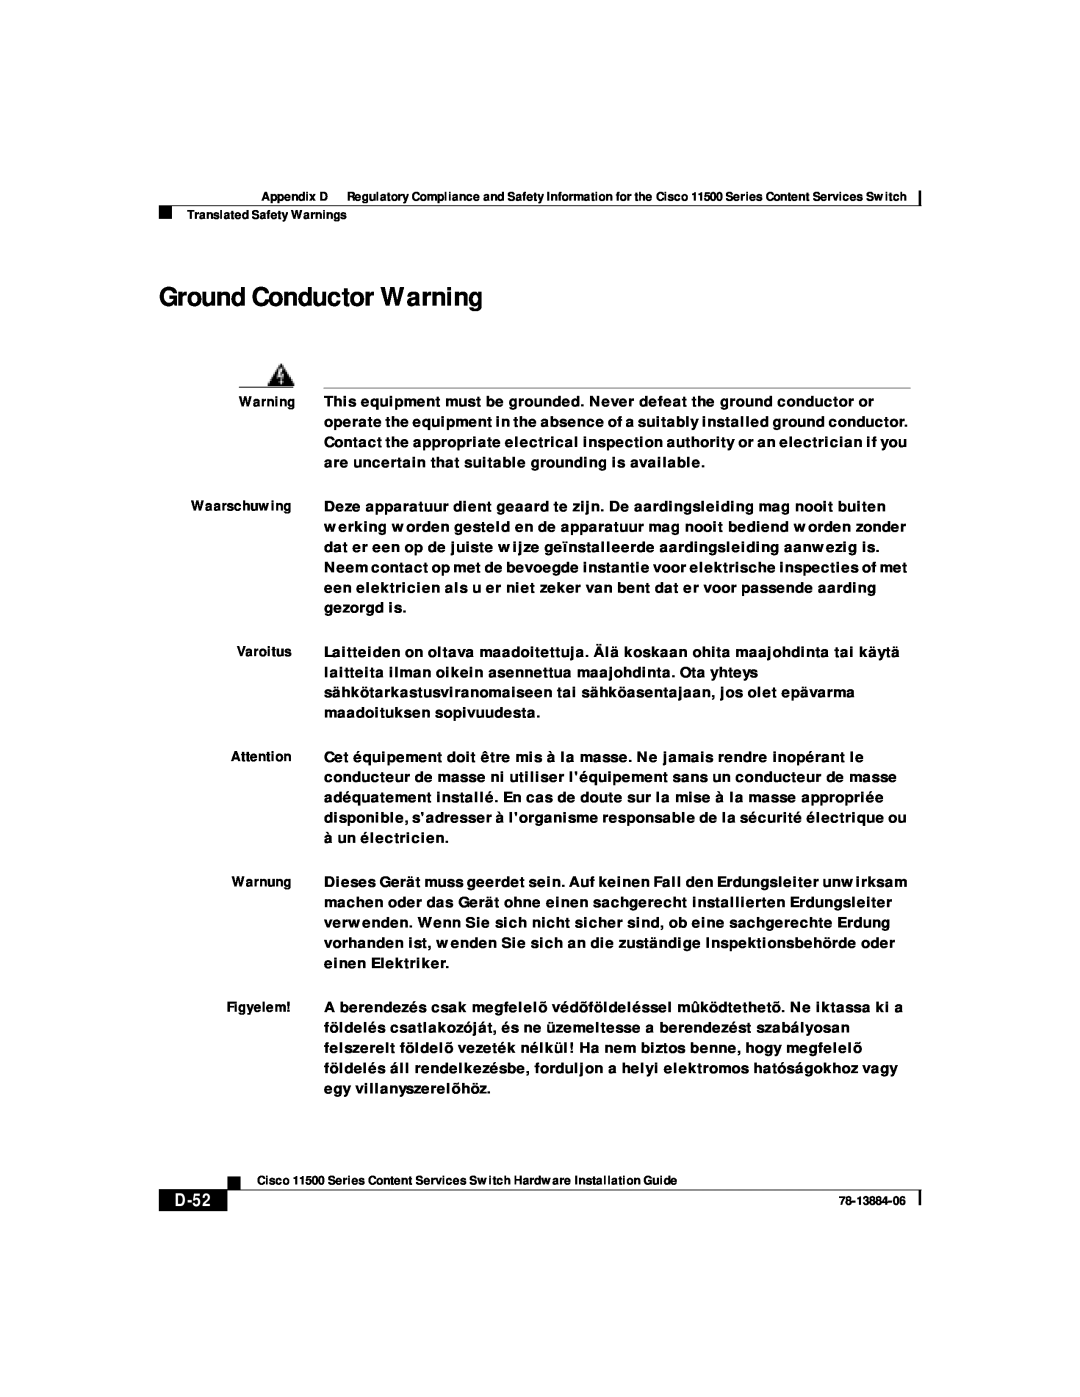 Cisco Systems 11500 Series manual Ground Conductor Warning, D-52 